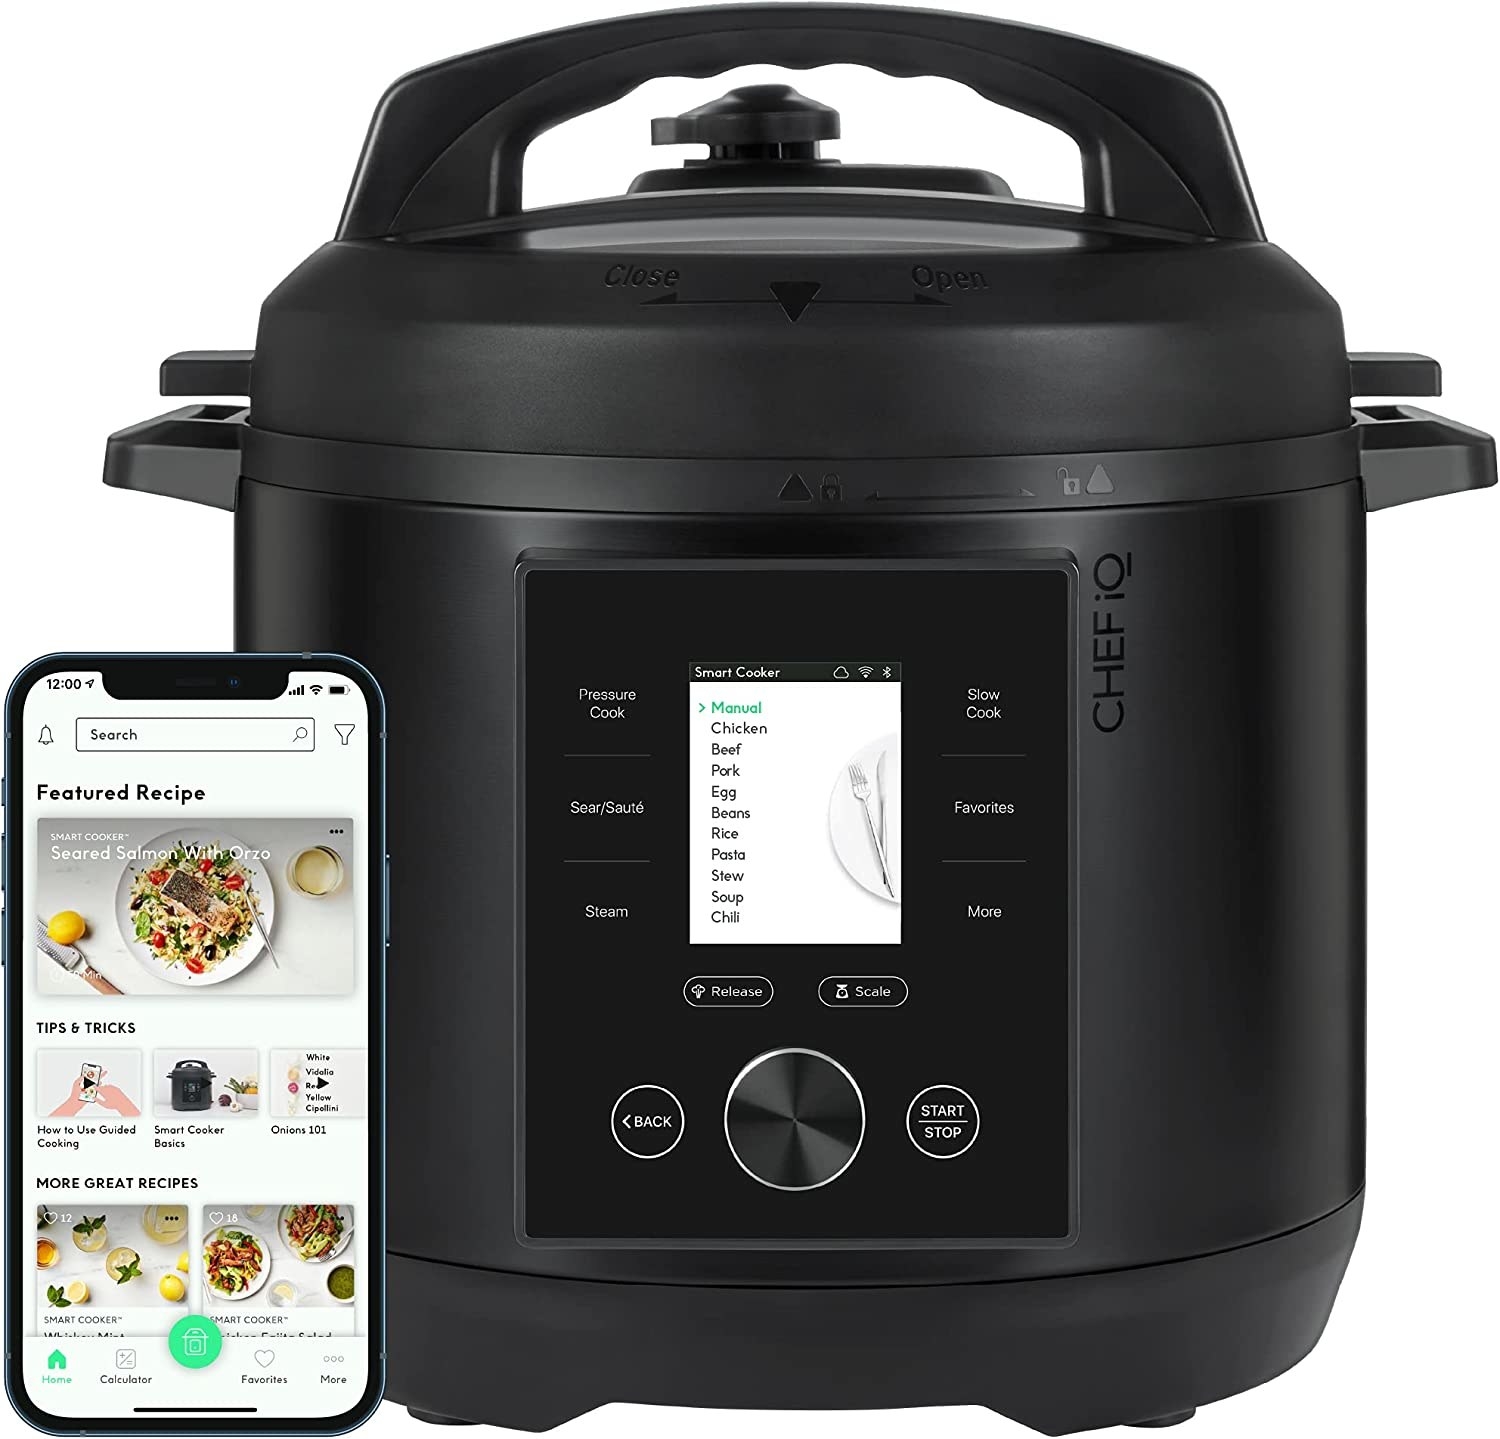 The CHEF iQ and a phone opened to its app containing recipes, tips, tricks, and more